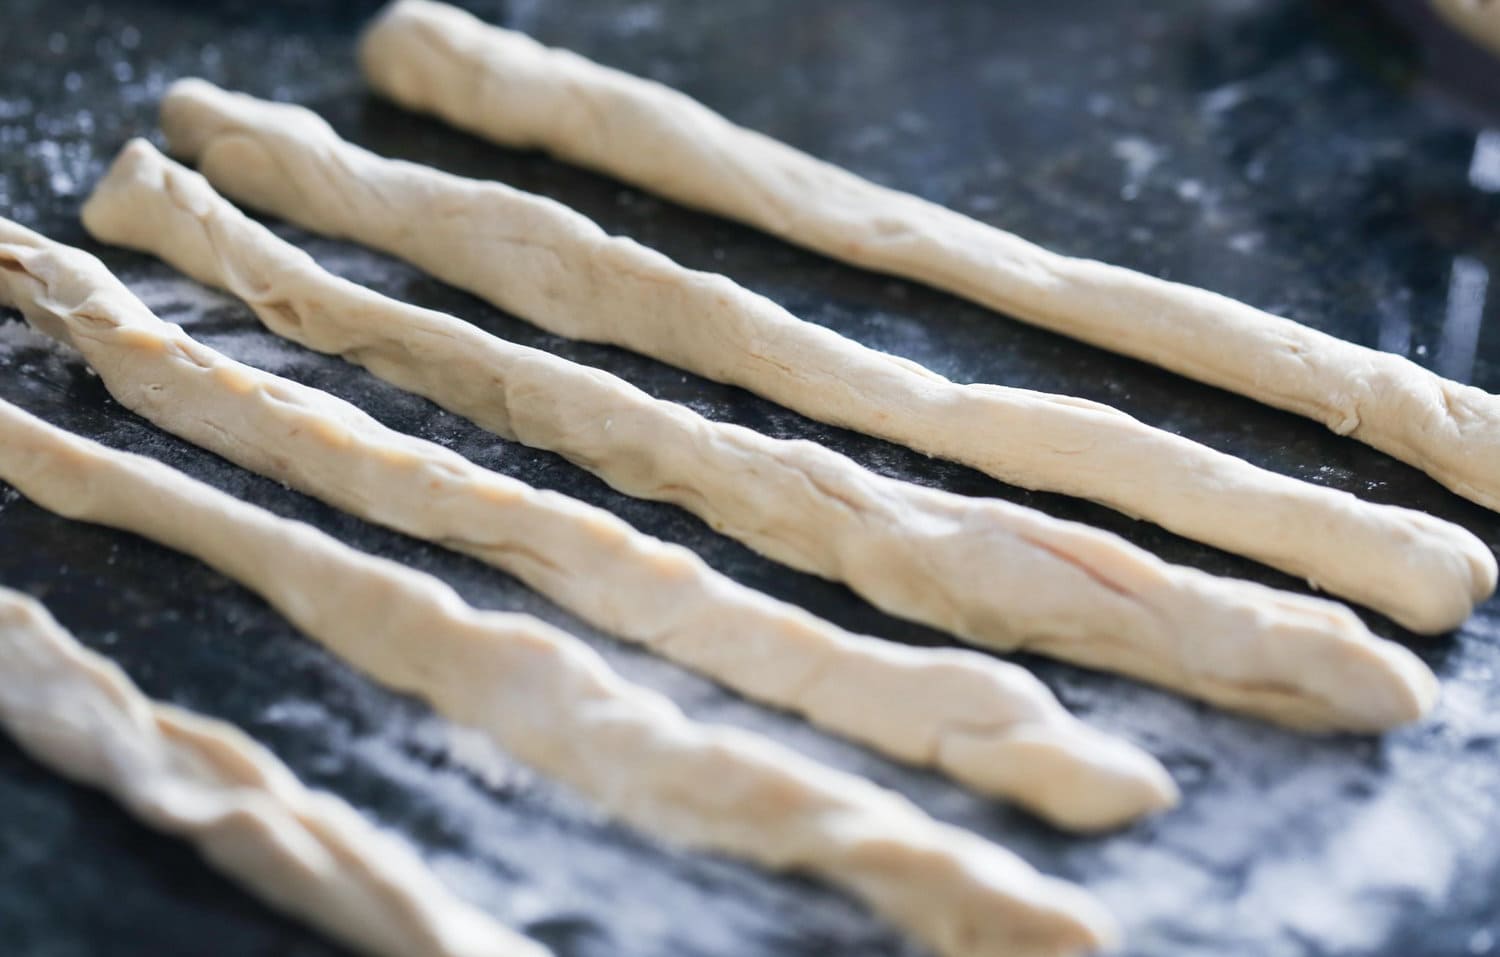 Strips of dough seperated